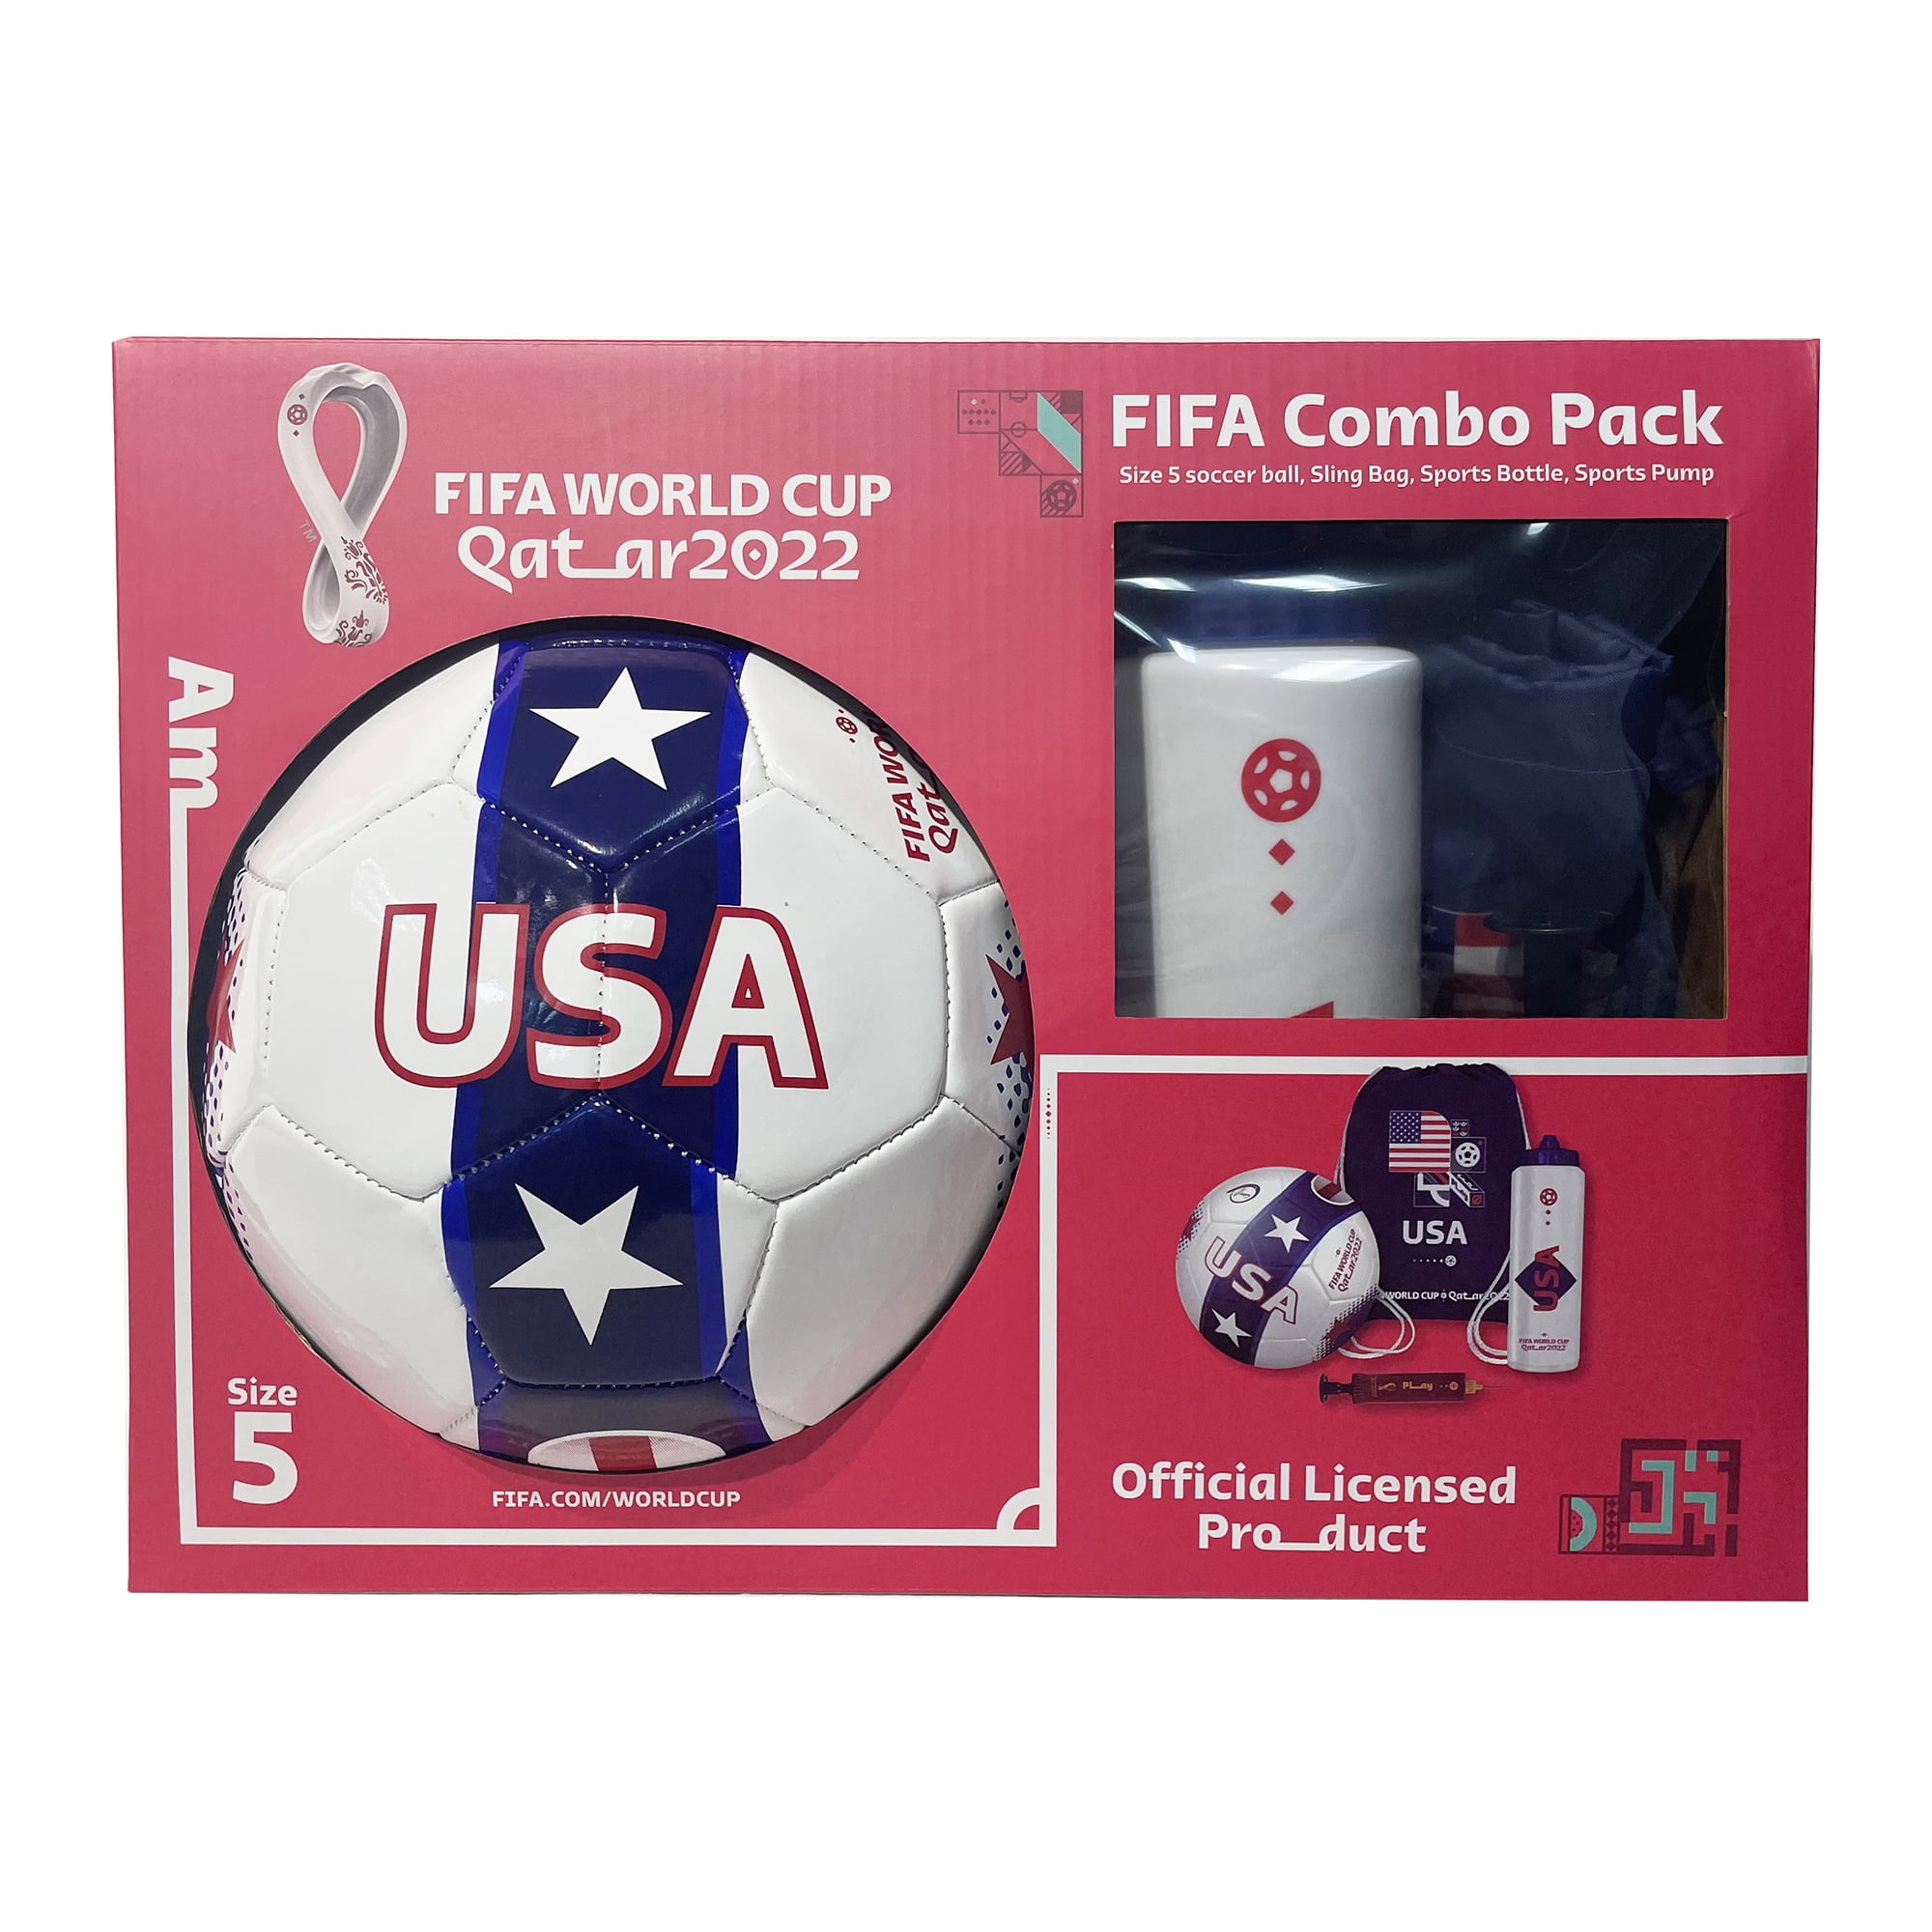 FIFA World Cup Russia 2018 Official Hospitality Bag - Blue Gold White | eBay